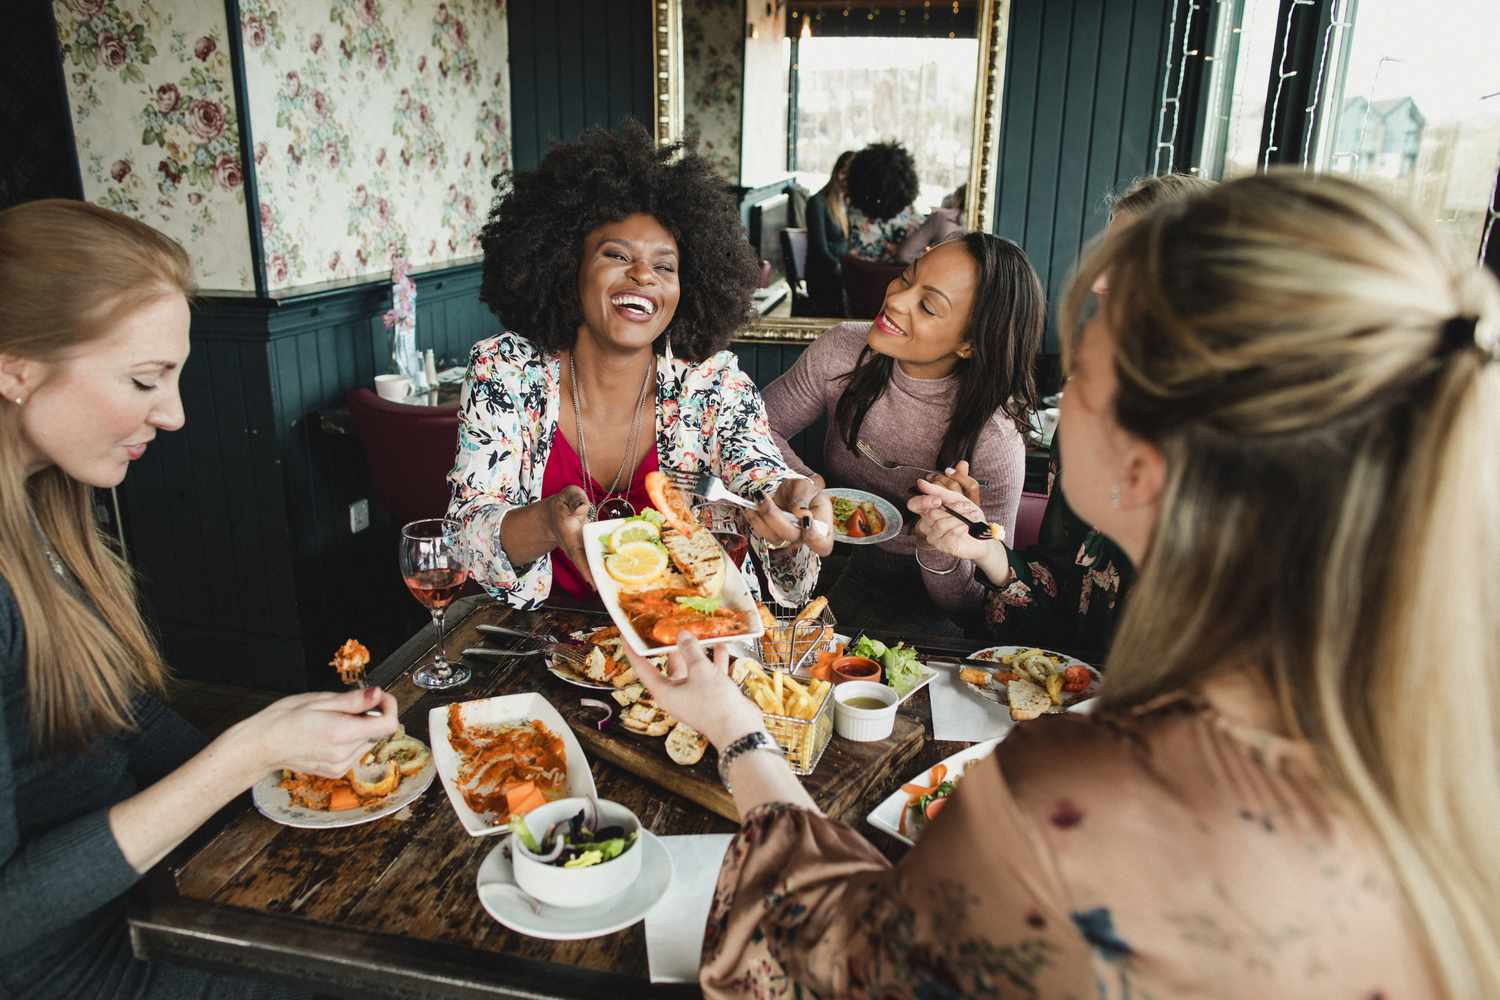 craig haddow recommends Women Eating Out Other Women